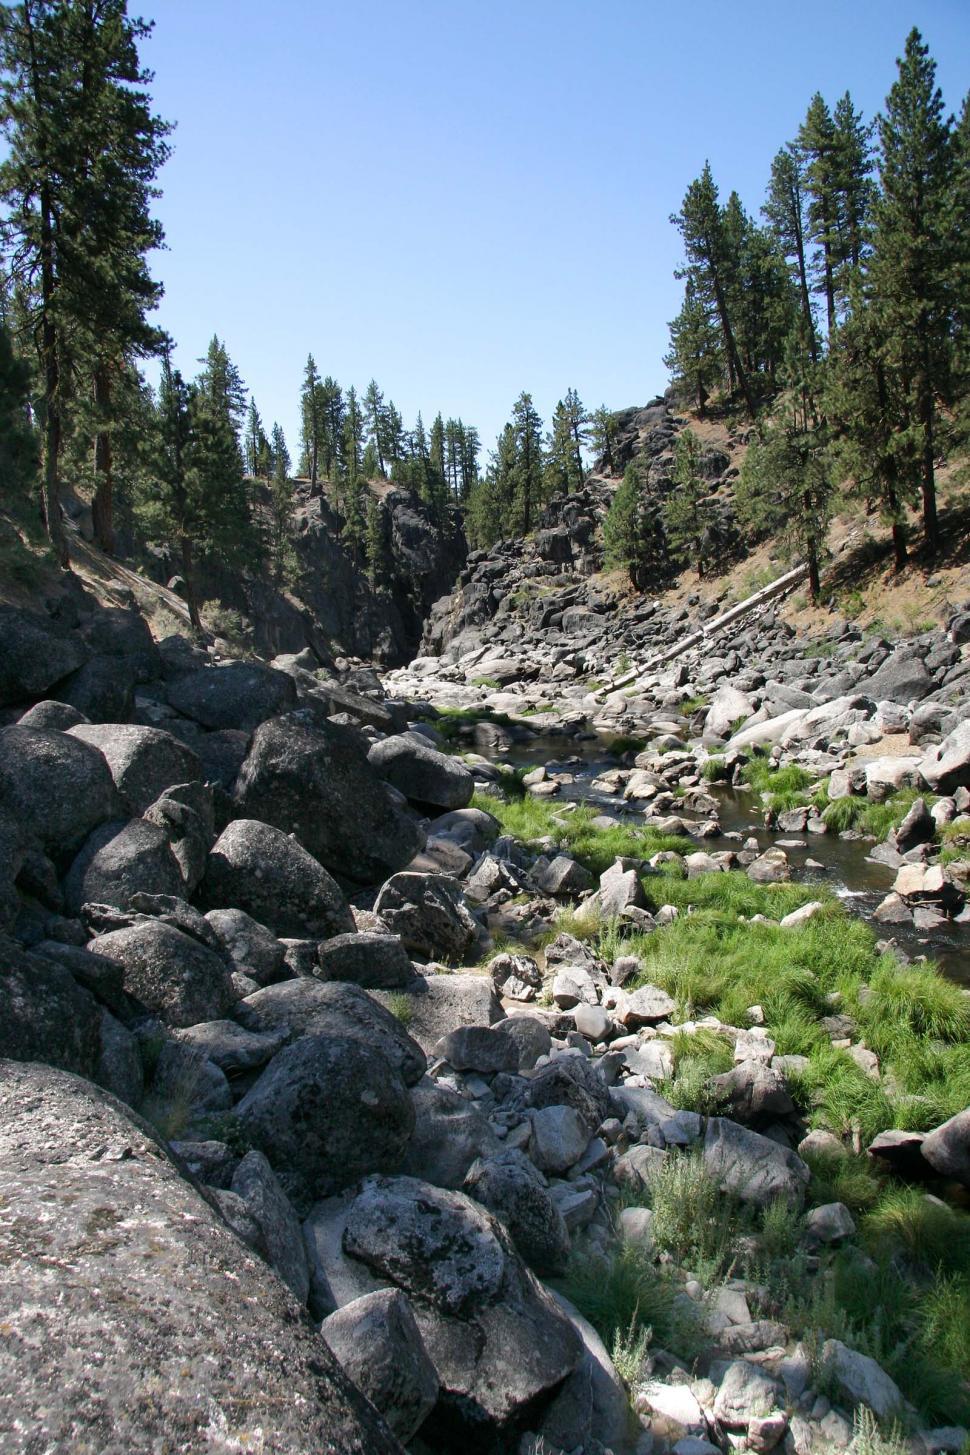 Free Image of river gorge feather california stream rocks rugged trees pine tree water wilderness bed riverbed streambed forest timber woods canyon mountain mountains riparian 